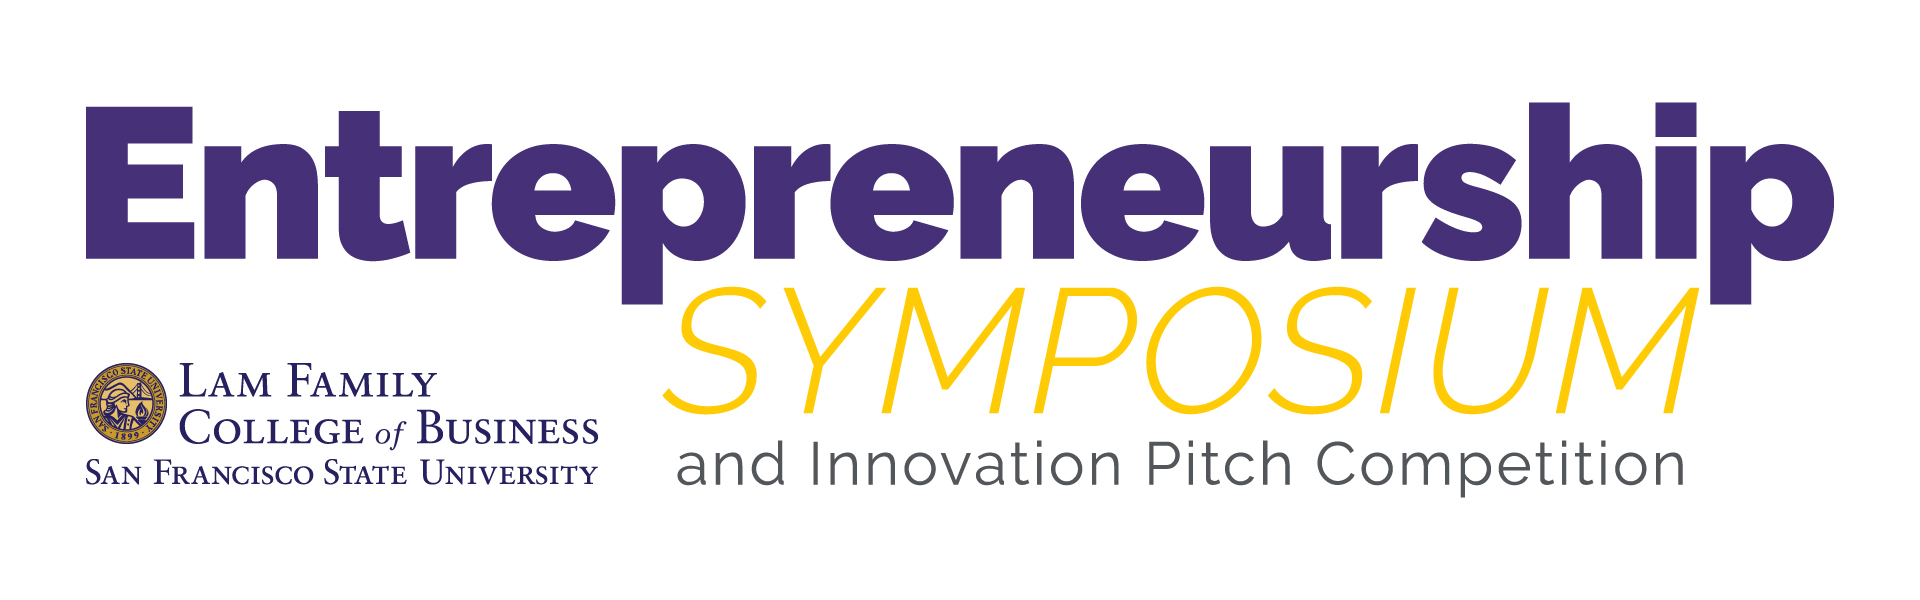 Entrepreneurship Symposium and Innovation Pitch Competition - April 24, 2020